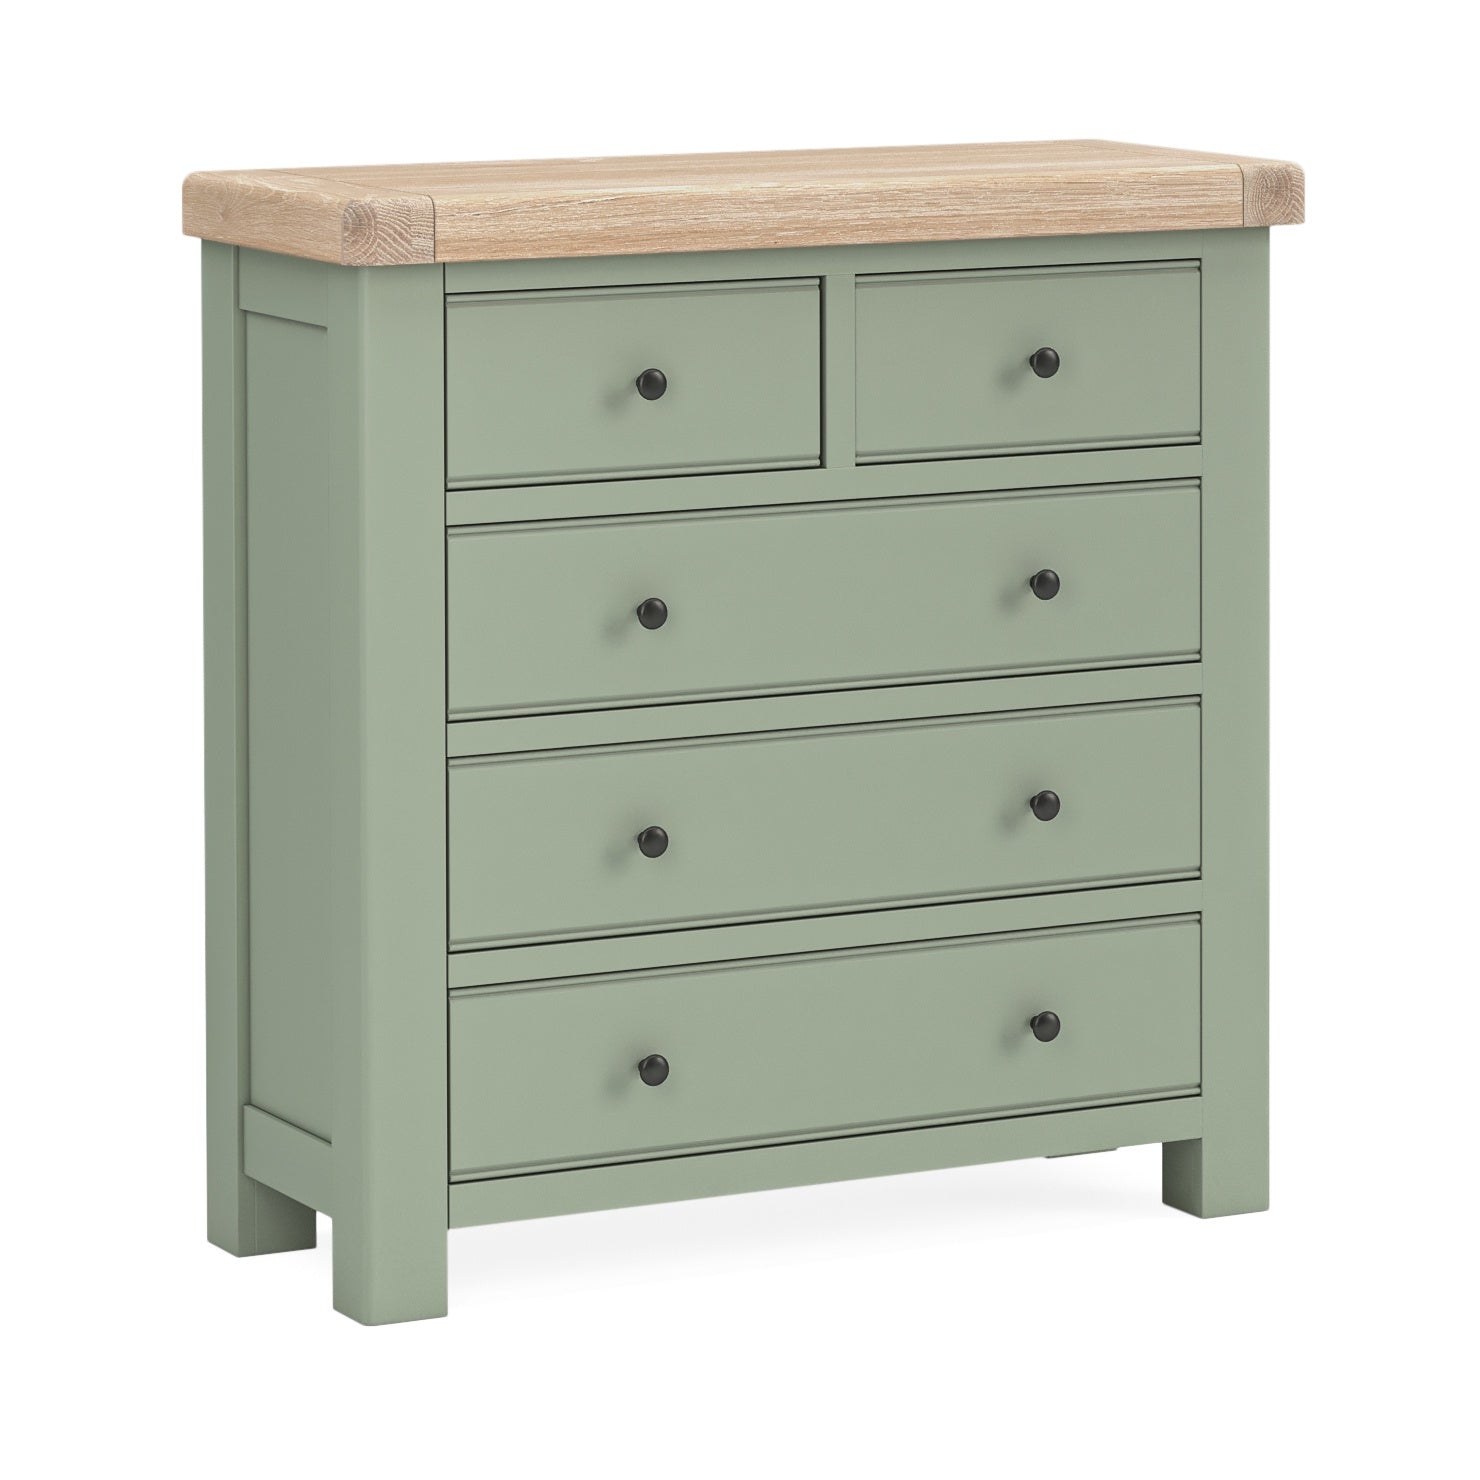 Provence Oak Sage 2 Over 3 Chest Of Drawers.